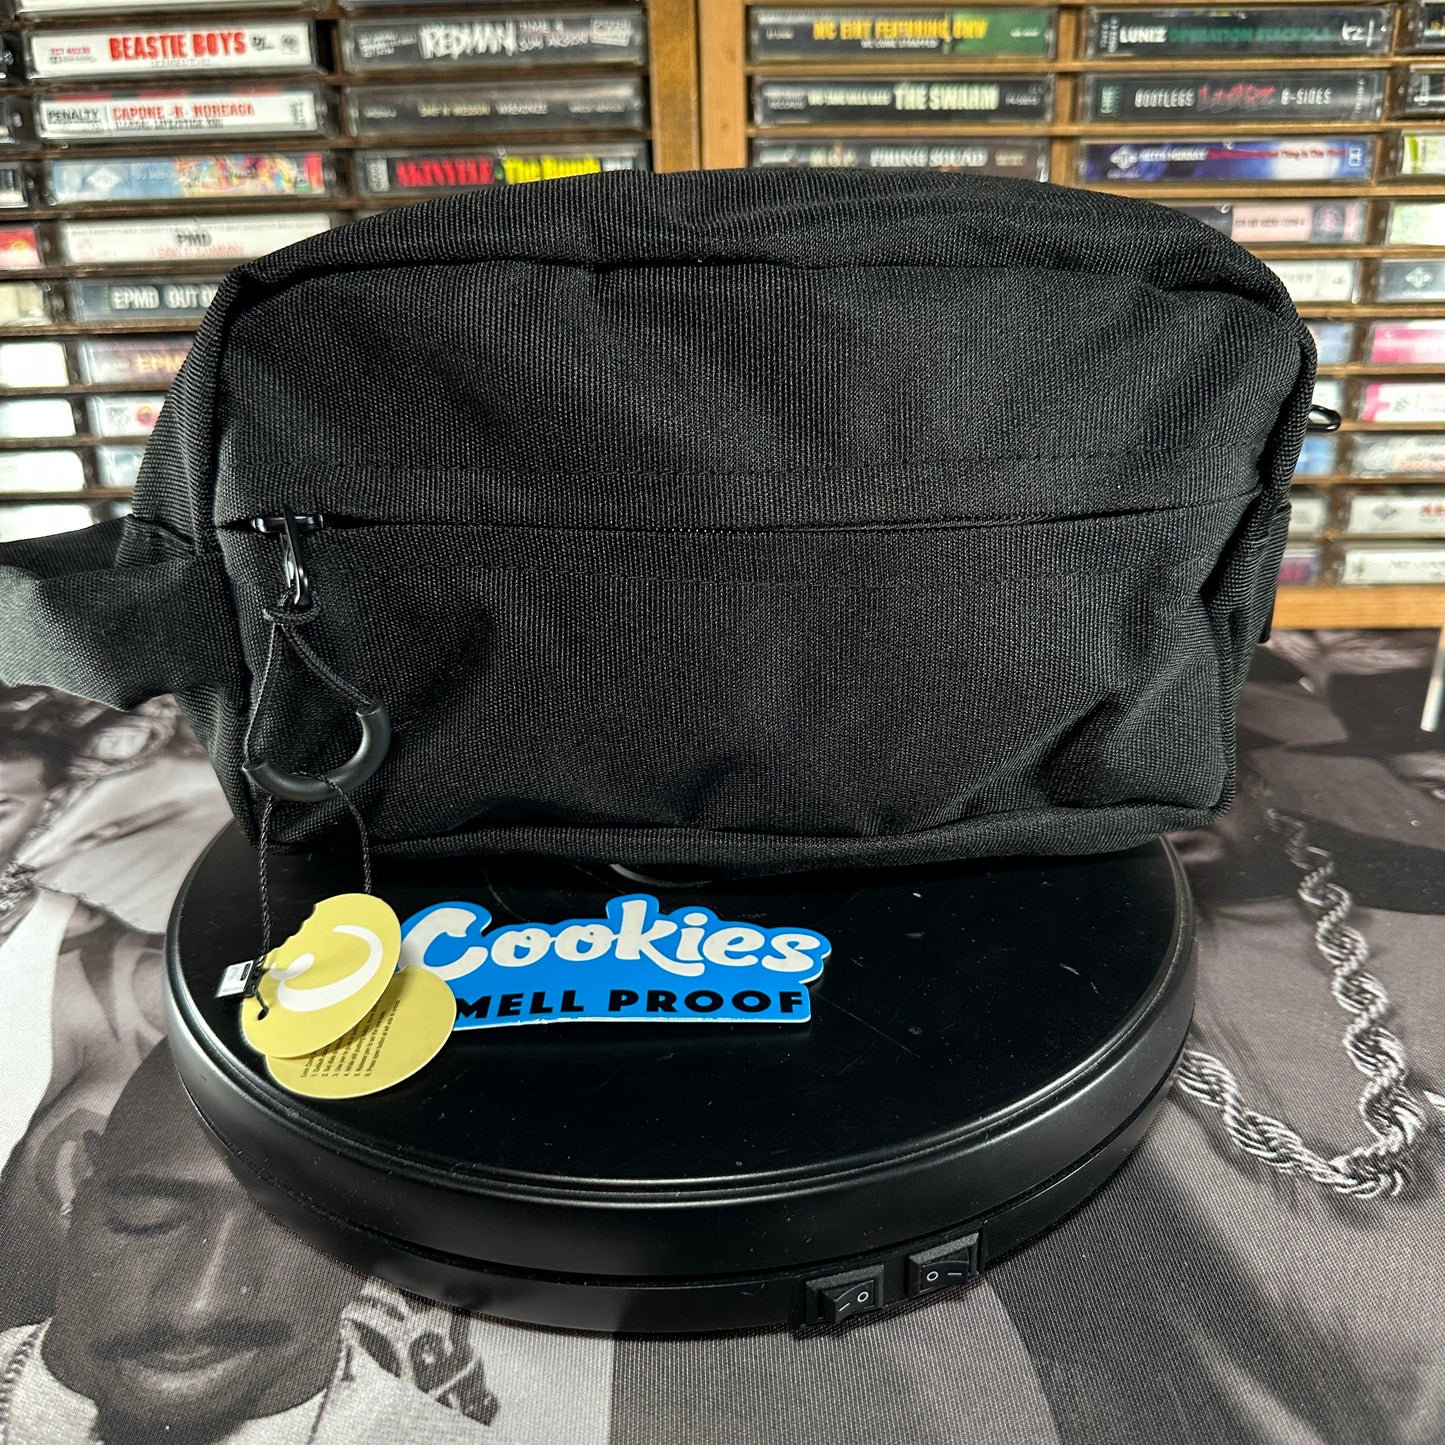 Cookies Smell Proof Canvas Poly Stash / Toiletry Bag - Black